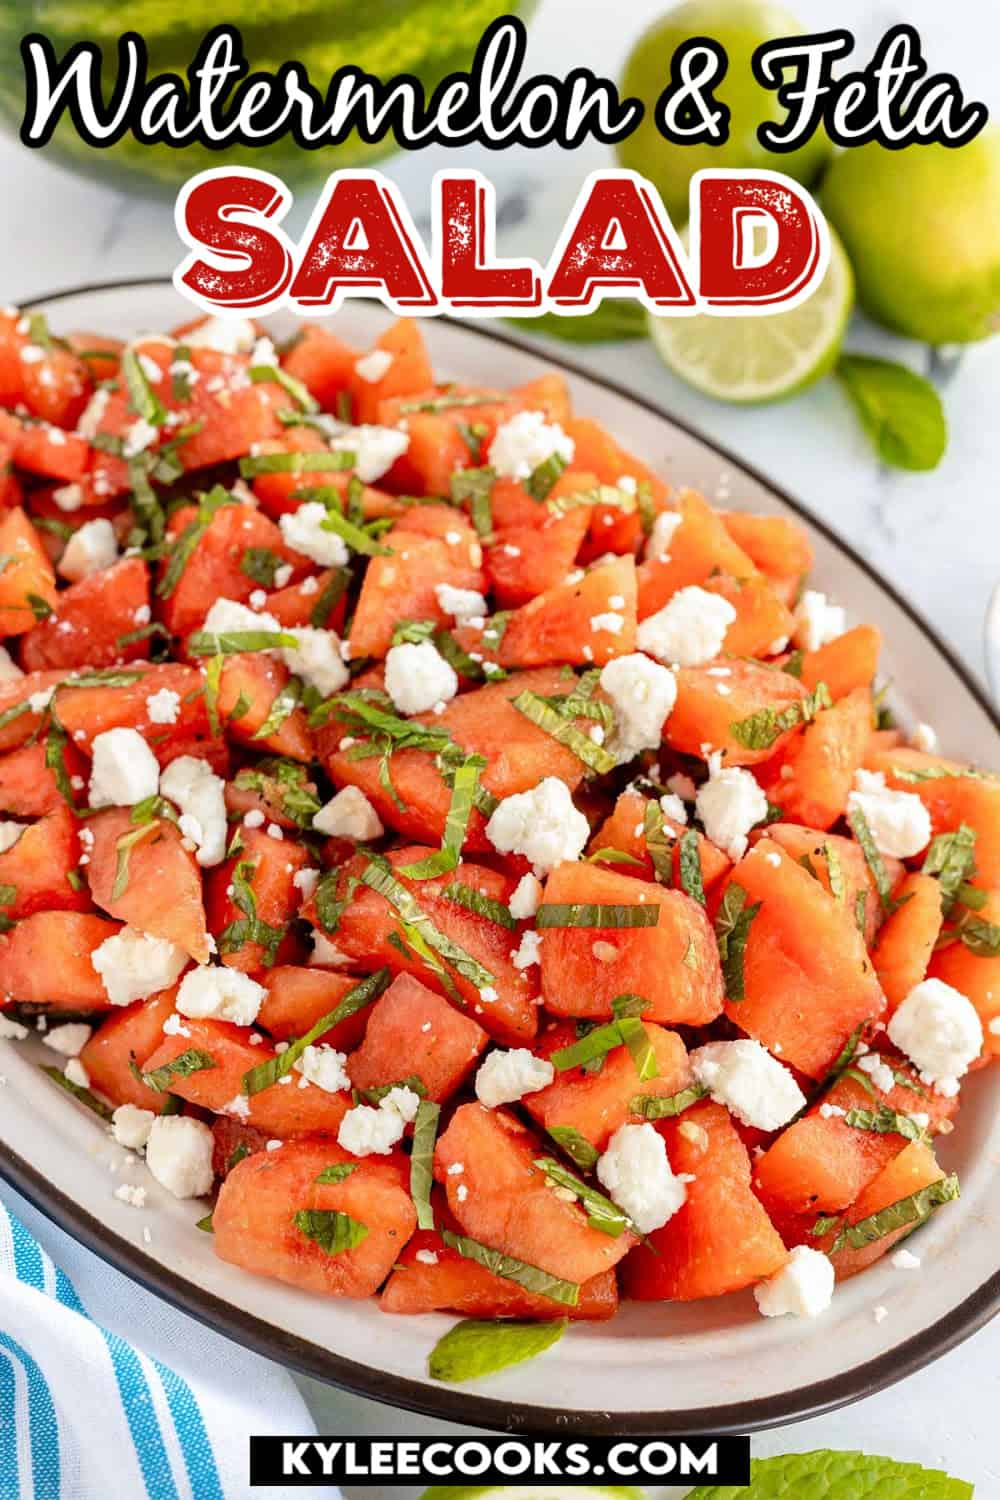 watermelon salad on an oval plate with recipe name overlaid in text.